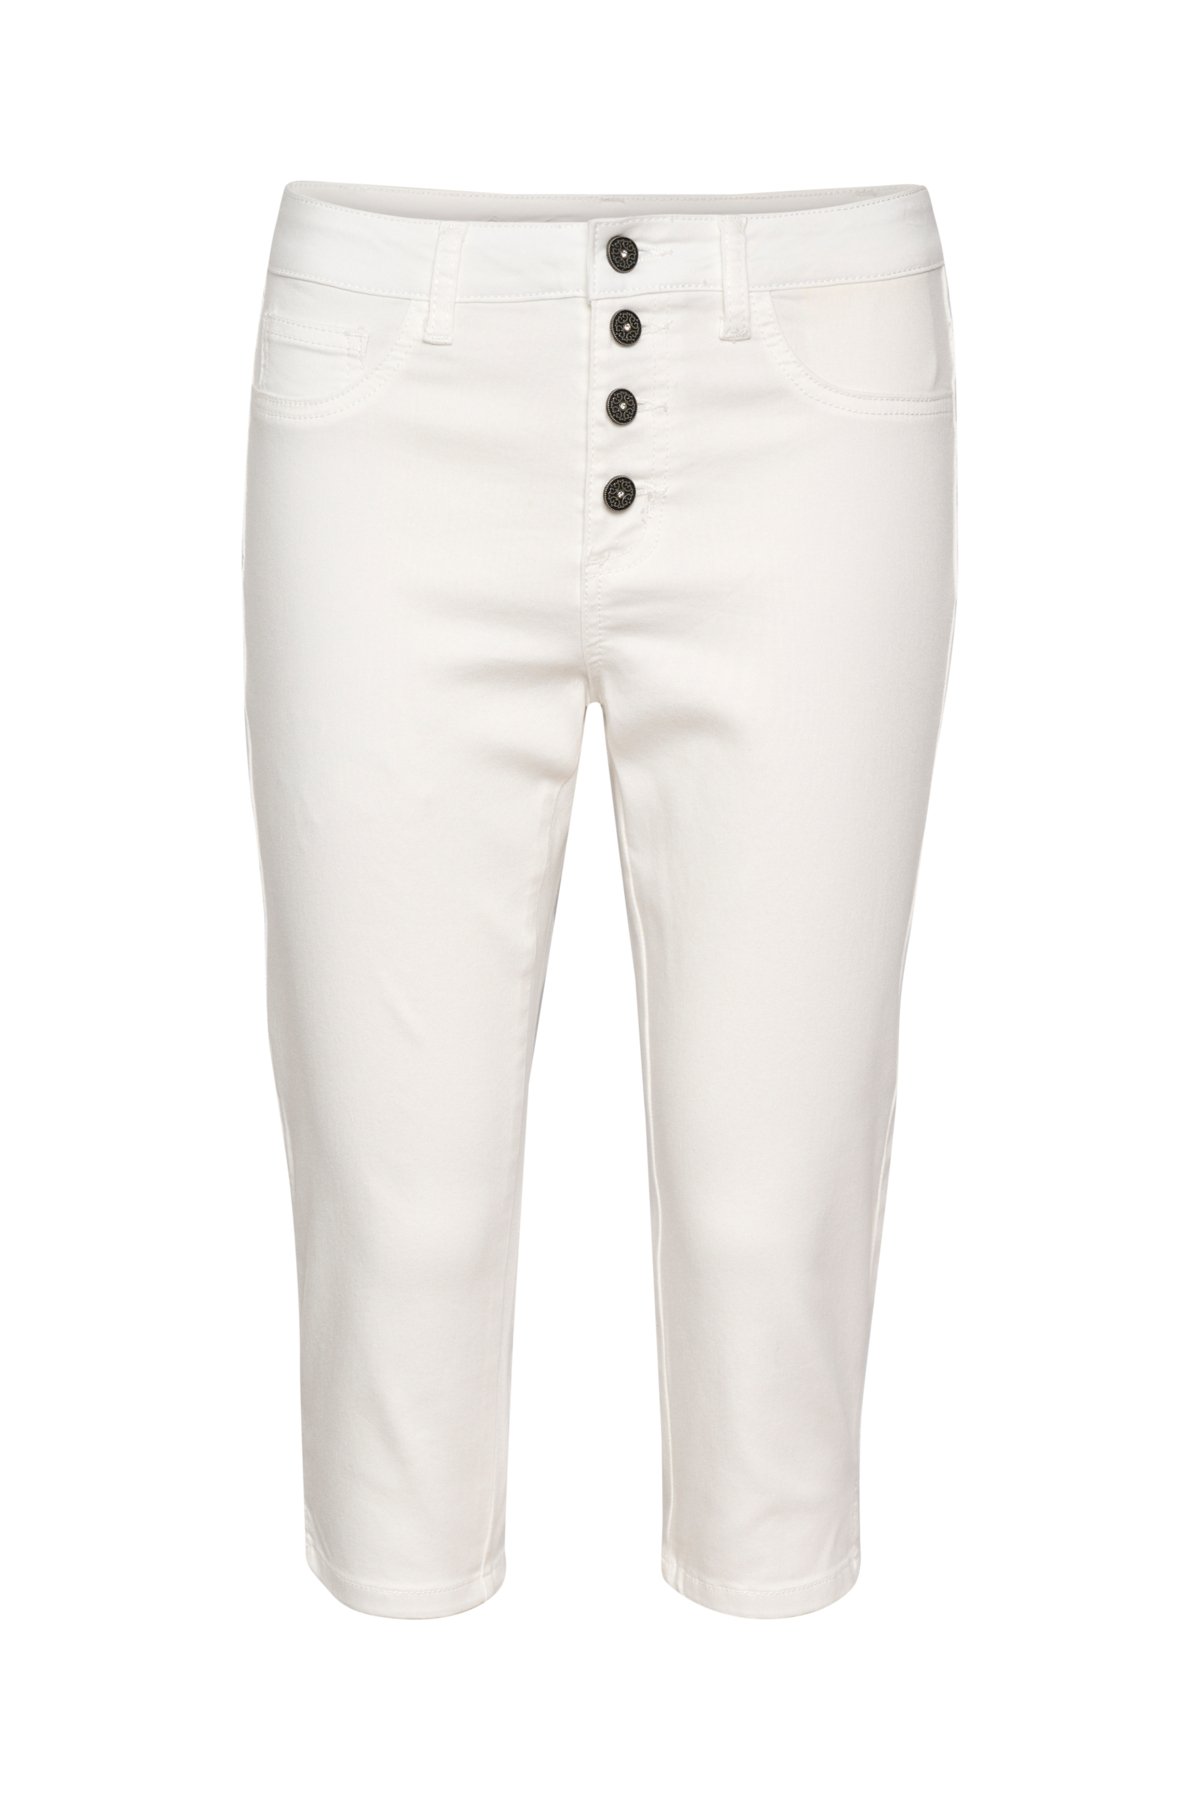 sprede Dom kvalitet Culture Cubentha Capri Annie Fit - Jeans & Bukser - By Haugsted